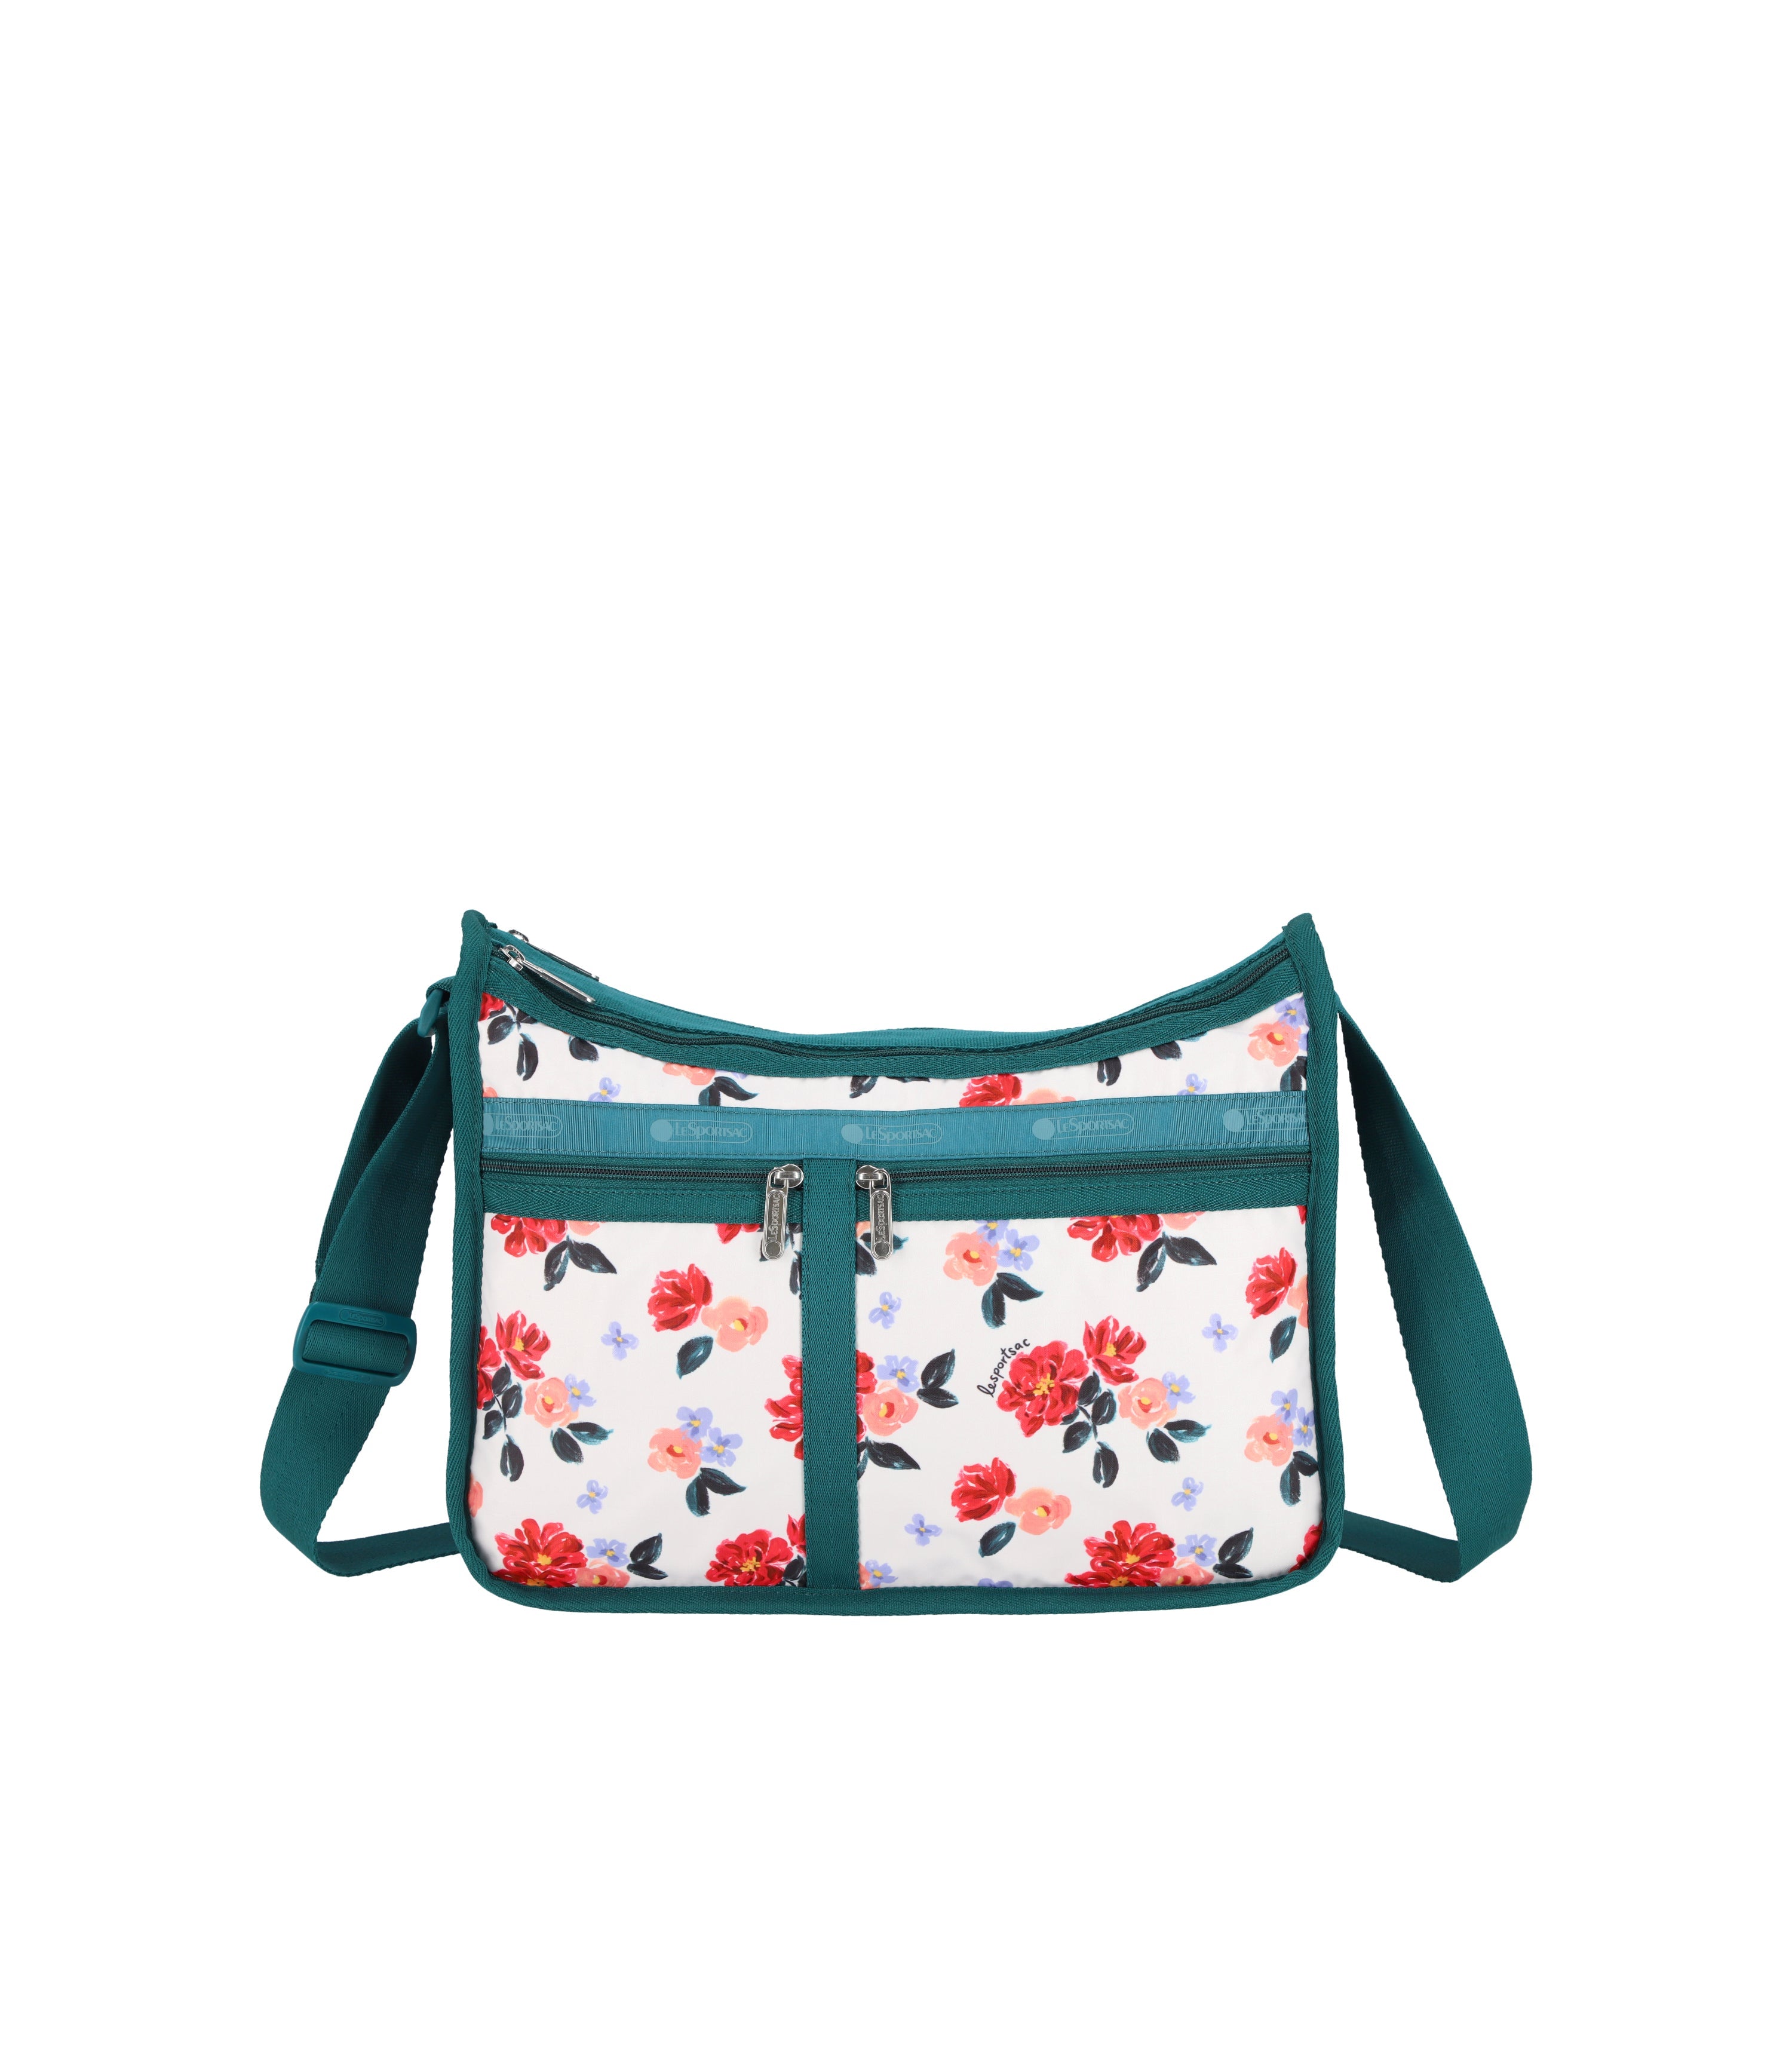 Deluxe Everyday Bag - Painterly Floral print